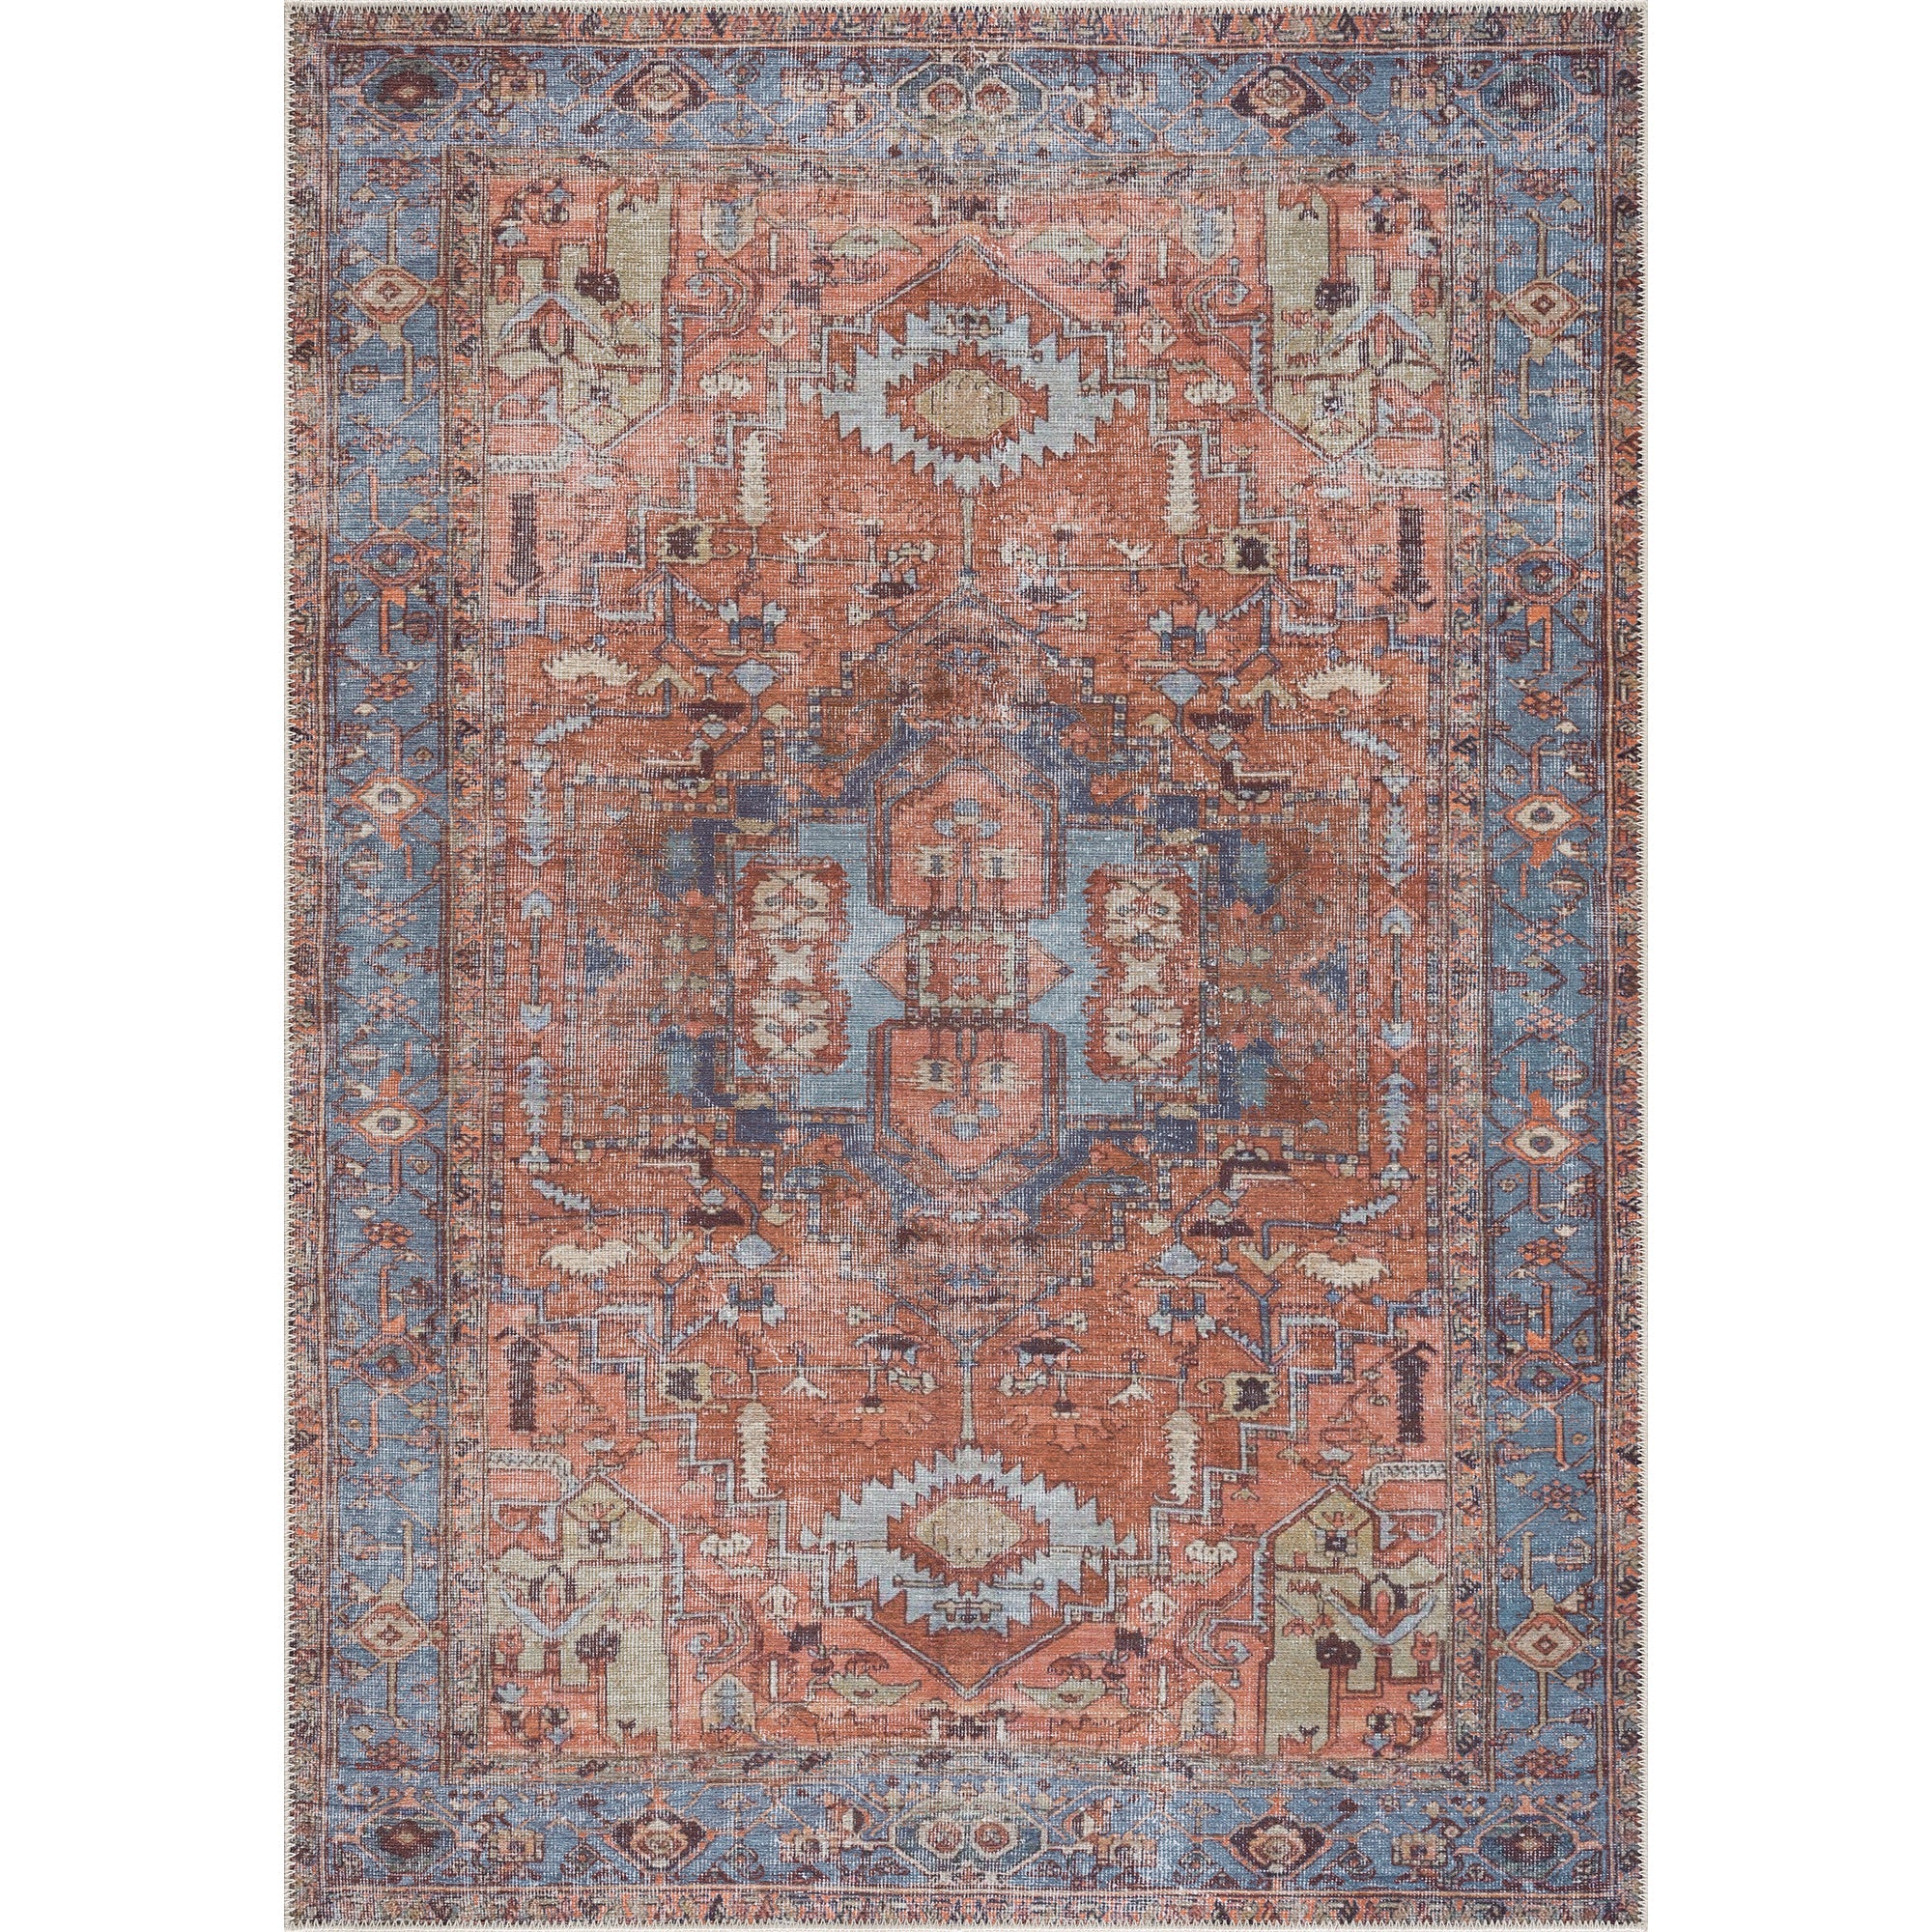 Lolita Faded Machine Washable Indoor/Outdoor Area Rug Bungalow Rose Rug Size: Rectangle 7'5 x 9'6